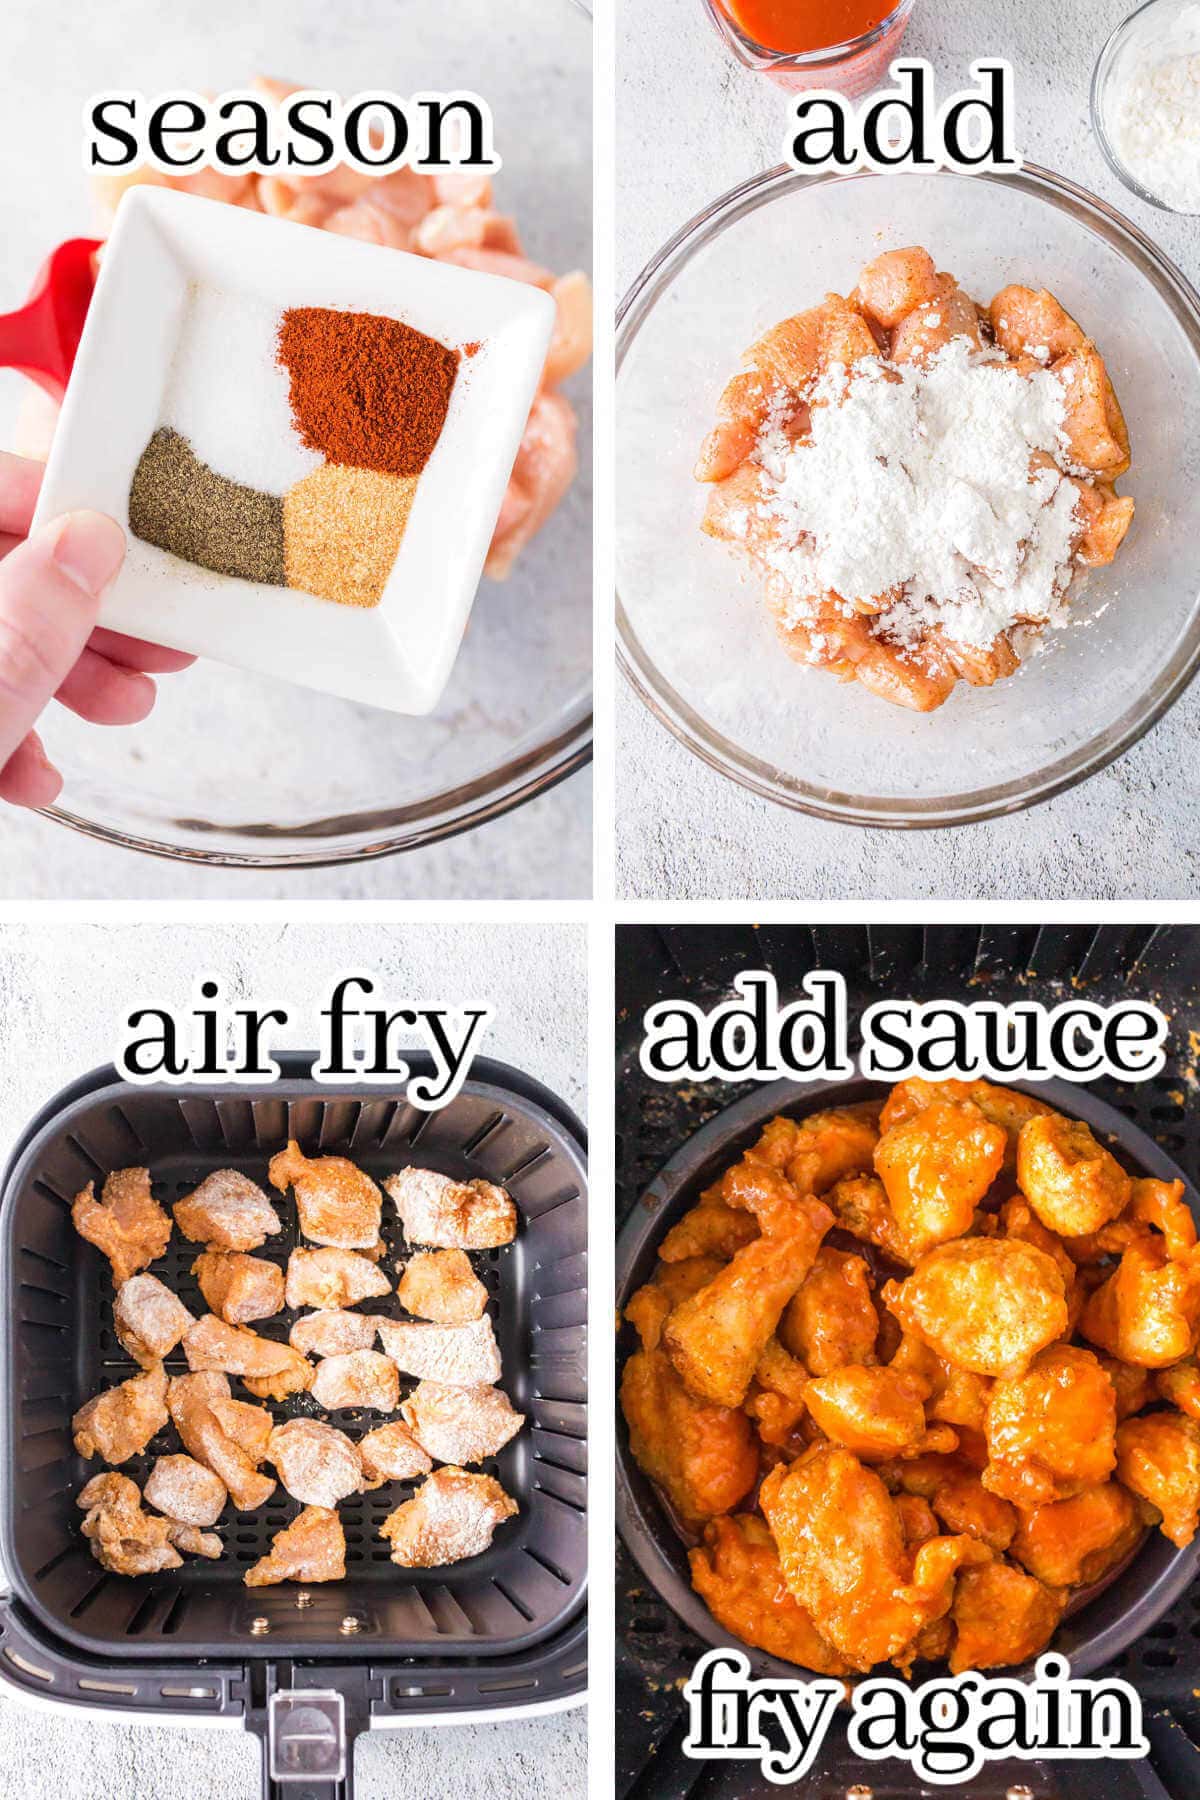 Step by step instructions to make air fryer recipe, with print overlay.